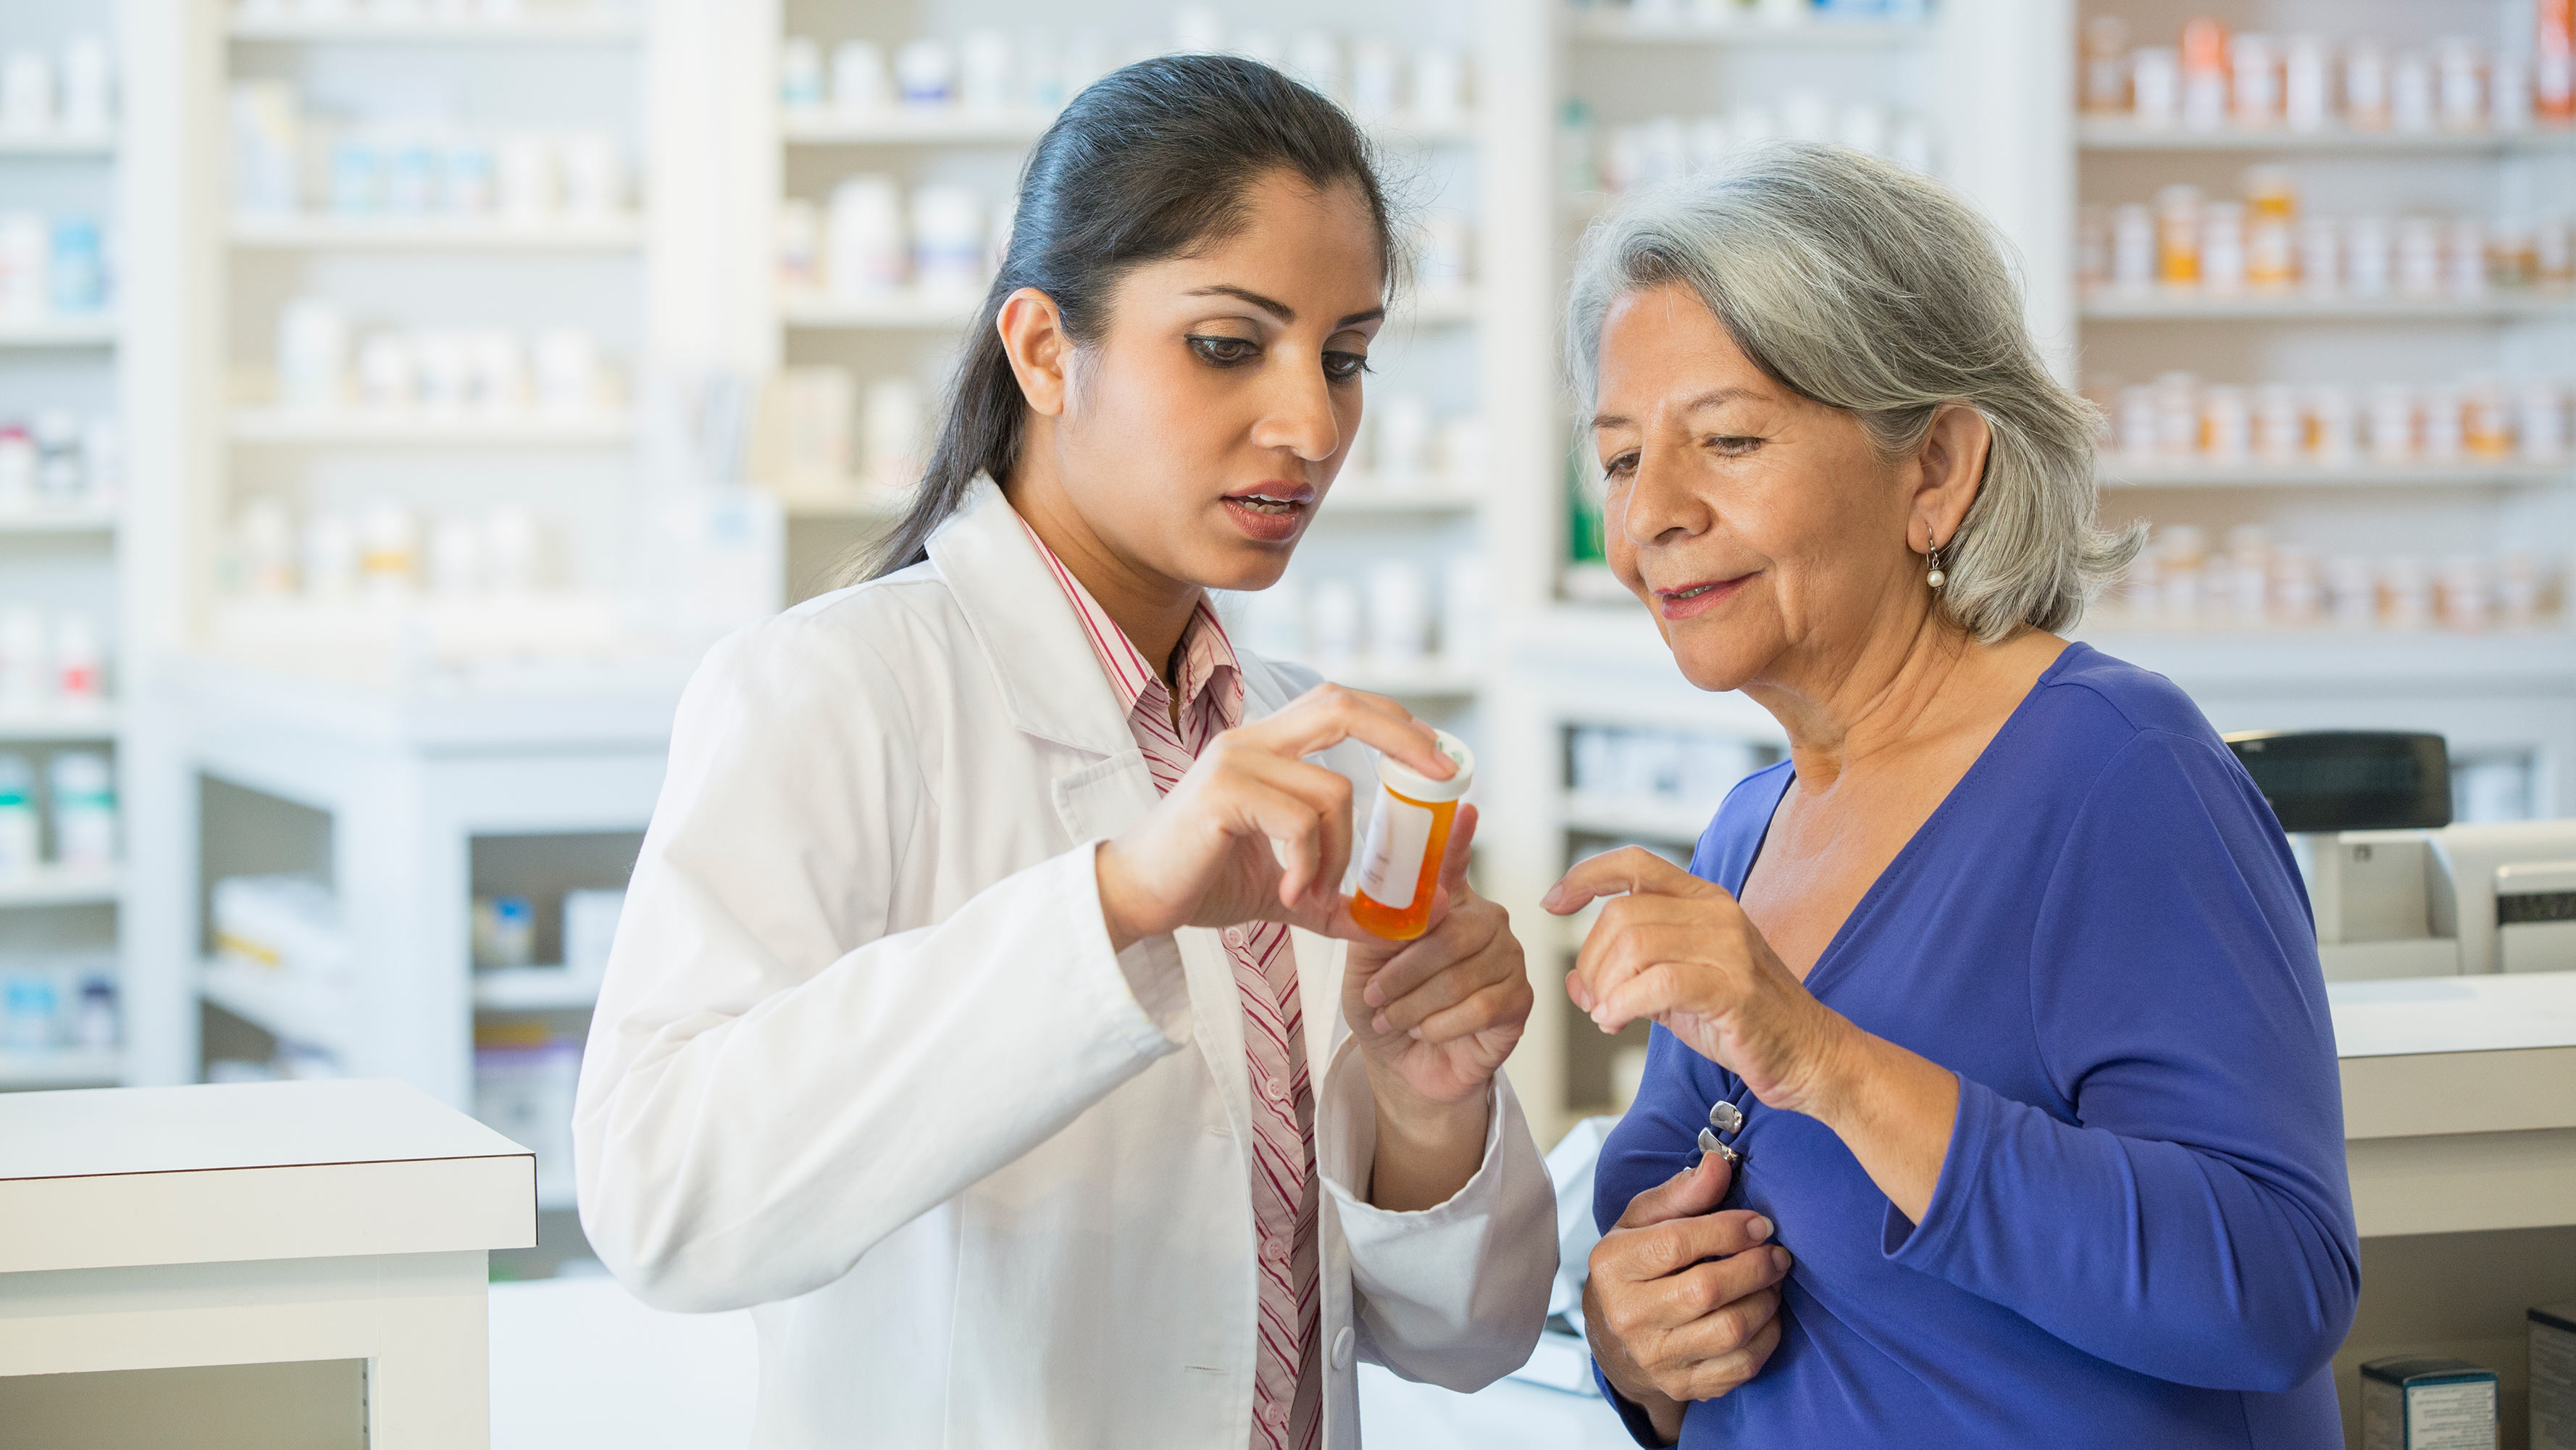 A female pharmacists advises an older female patient about her mediation at the pharmacy counter.